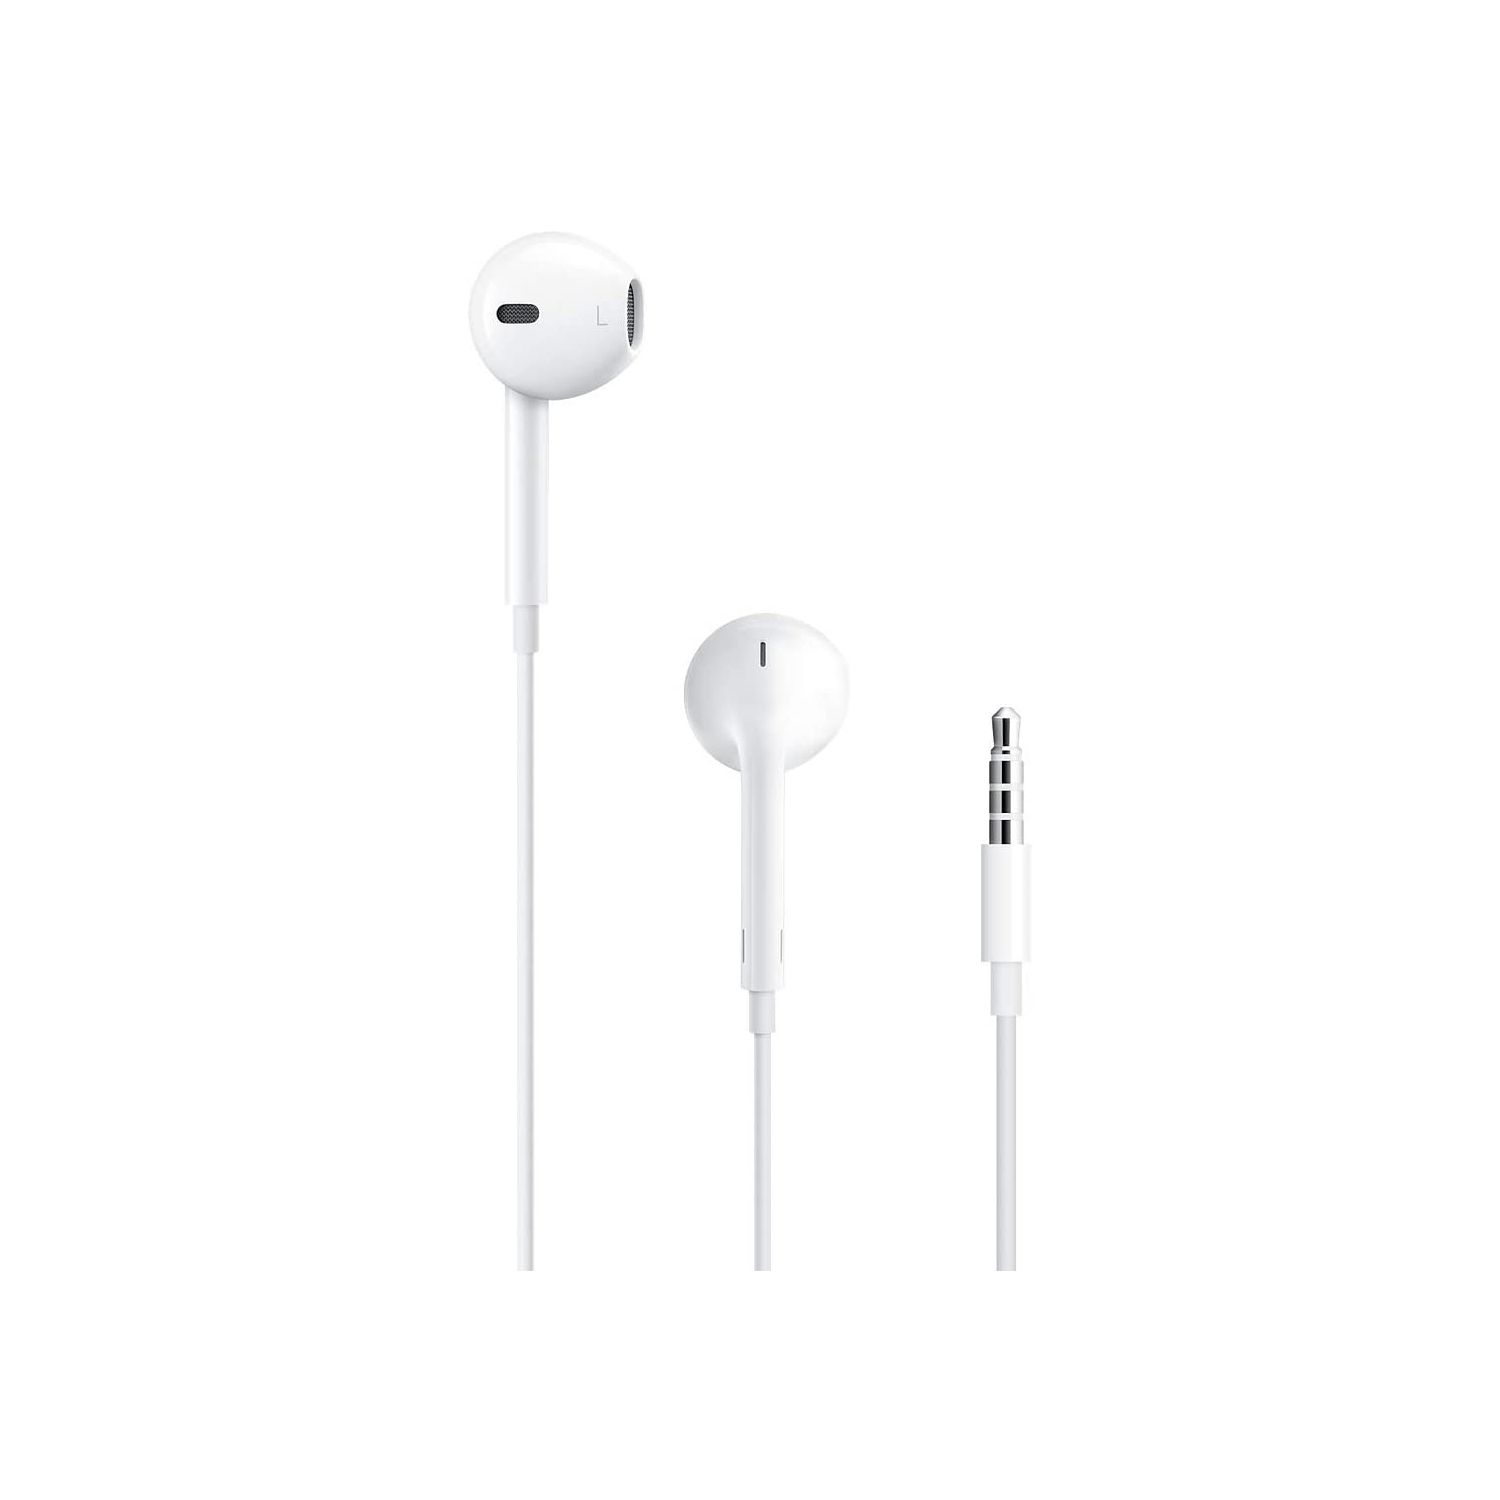 (CABLESHARK) 1 Pack-Apple/iPhone COMPATIBLE Earbuds/Headphones/Earphones with 3.5mm Wired in-Ear Headphones Wired Earbud with Microphone Compatible with iPhone, iPod, iPad, MP3, - White(FREE SHIPPING)